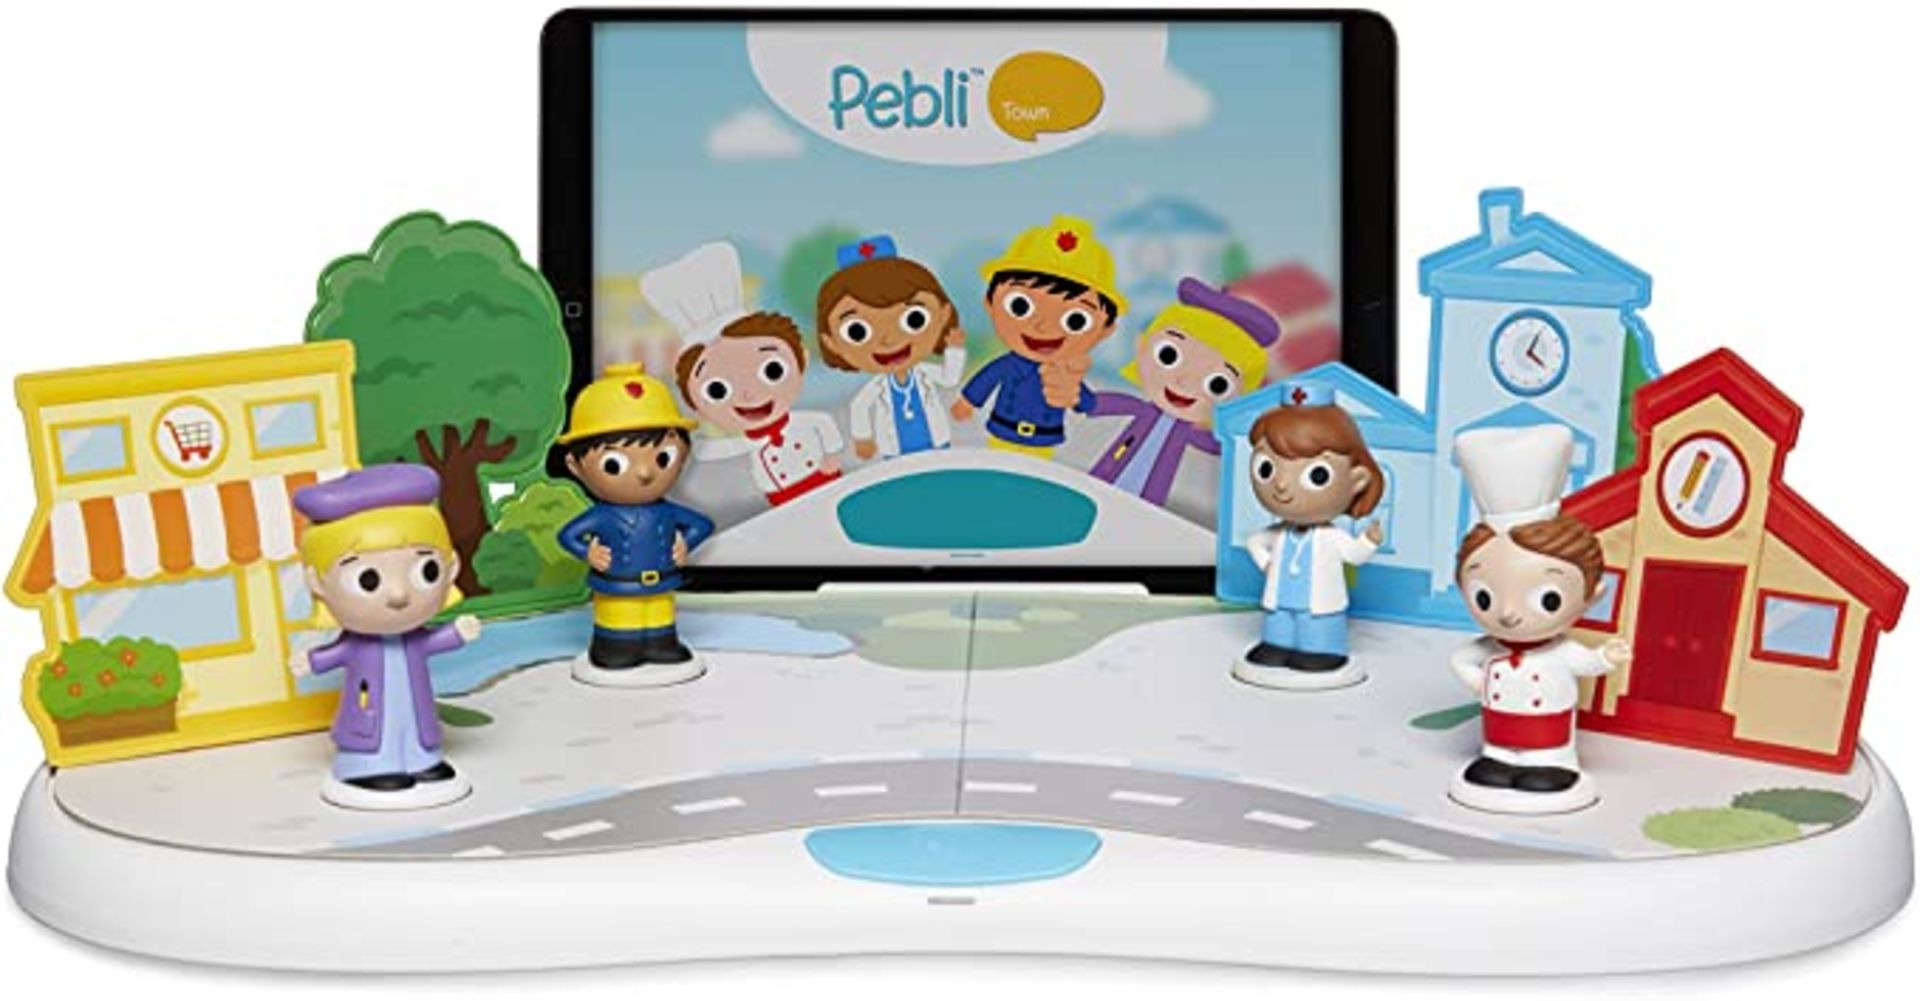 Pebli Town Interactive Toy Kids Children'S Educational Creative Toy. Condition Is New. Please Note